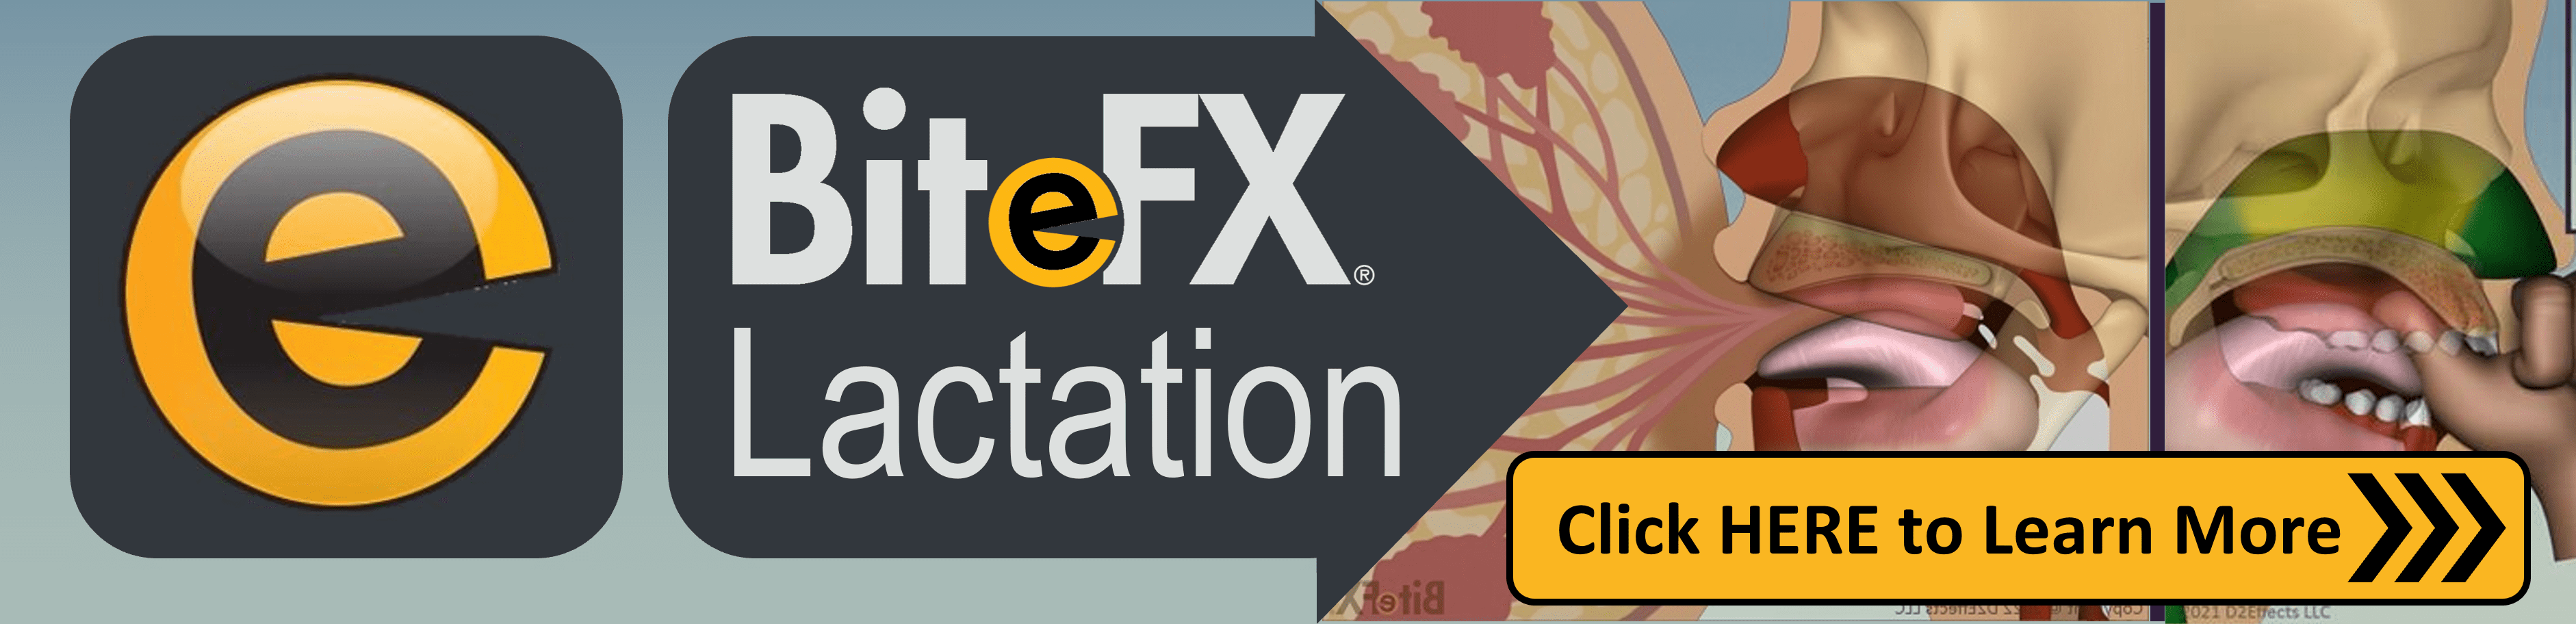 Bitefx Lactation - Click HERE to Learn More